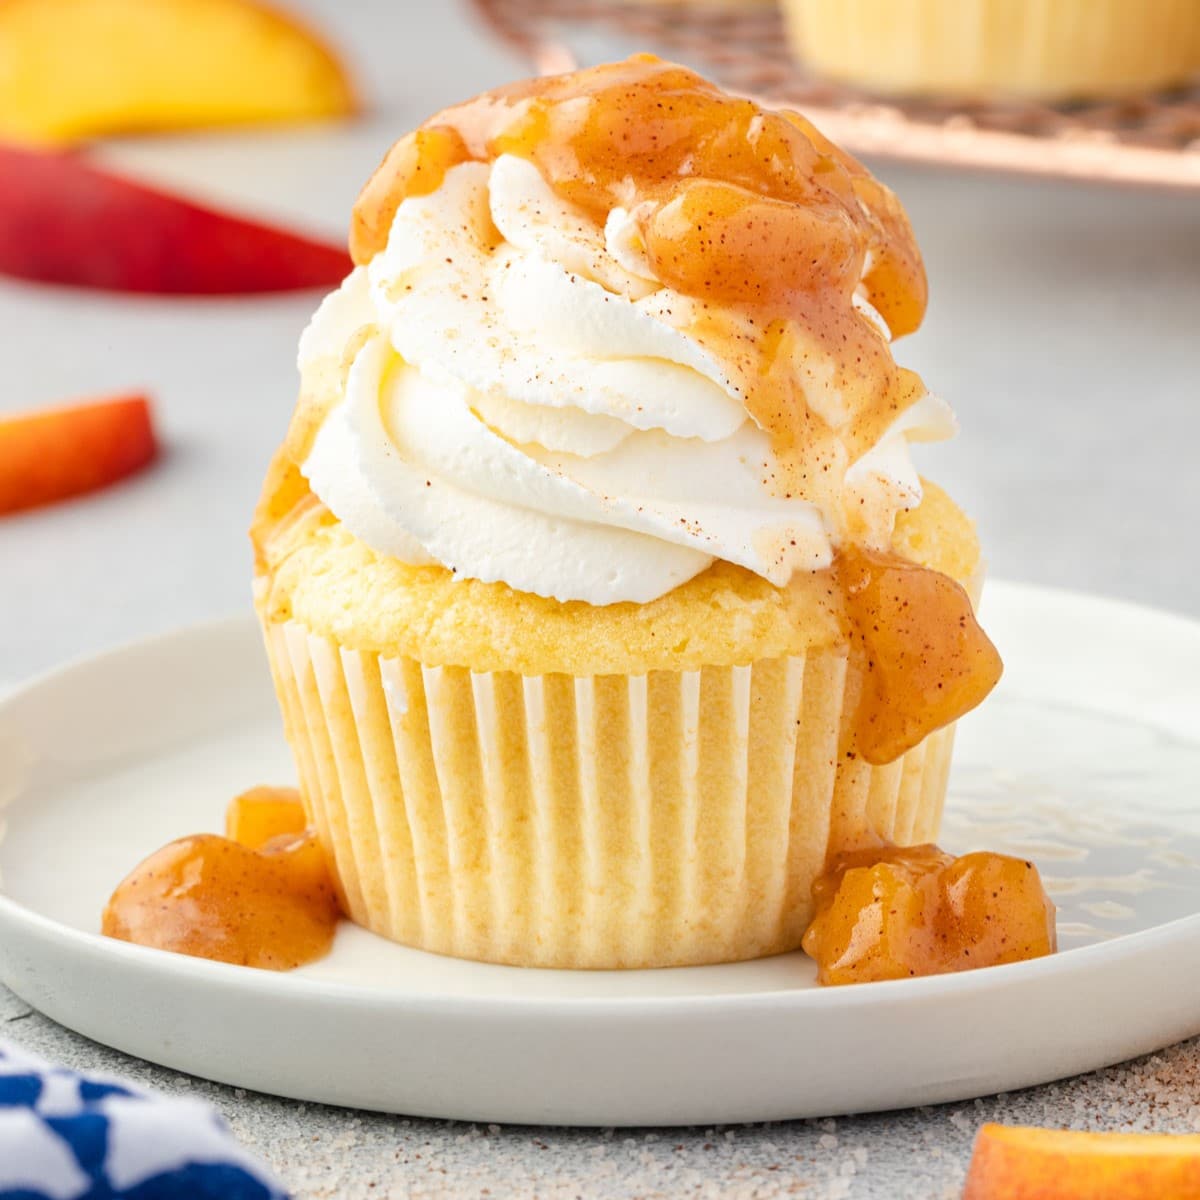 Side view of peach cobbler cupcakes on a platter, topped with whipped cream and fresh peach slices.